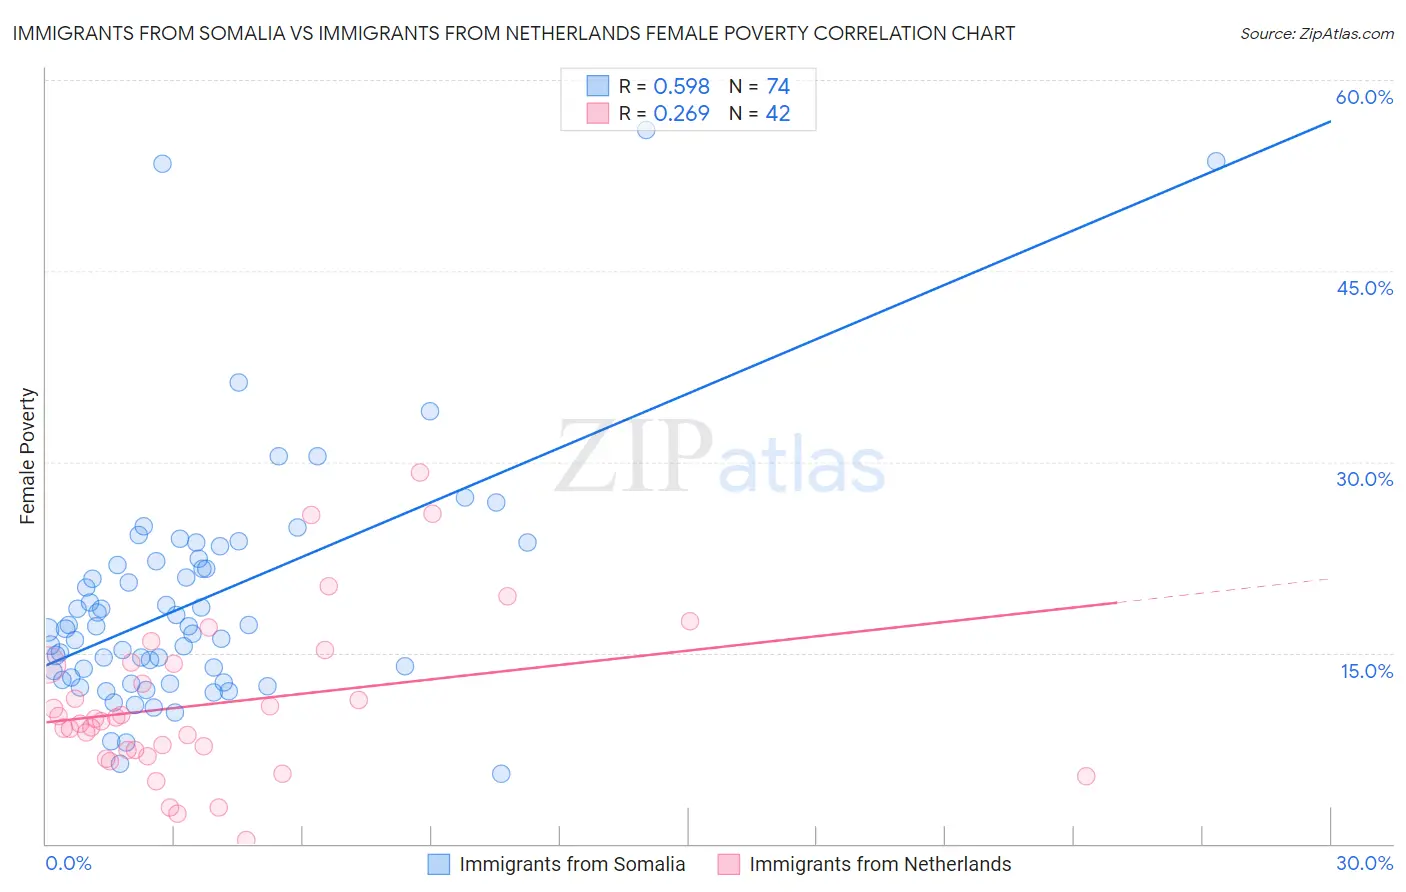 Immigrants from Somalia vs Immigrants from Netherlands Female Poverty